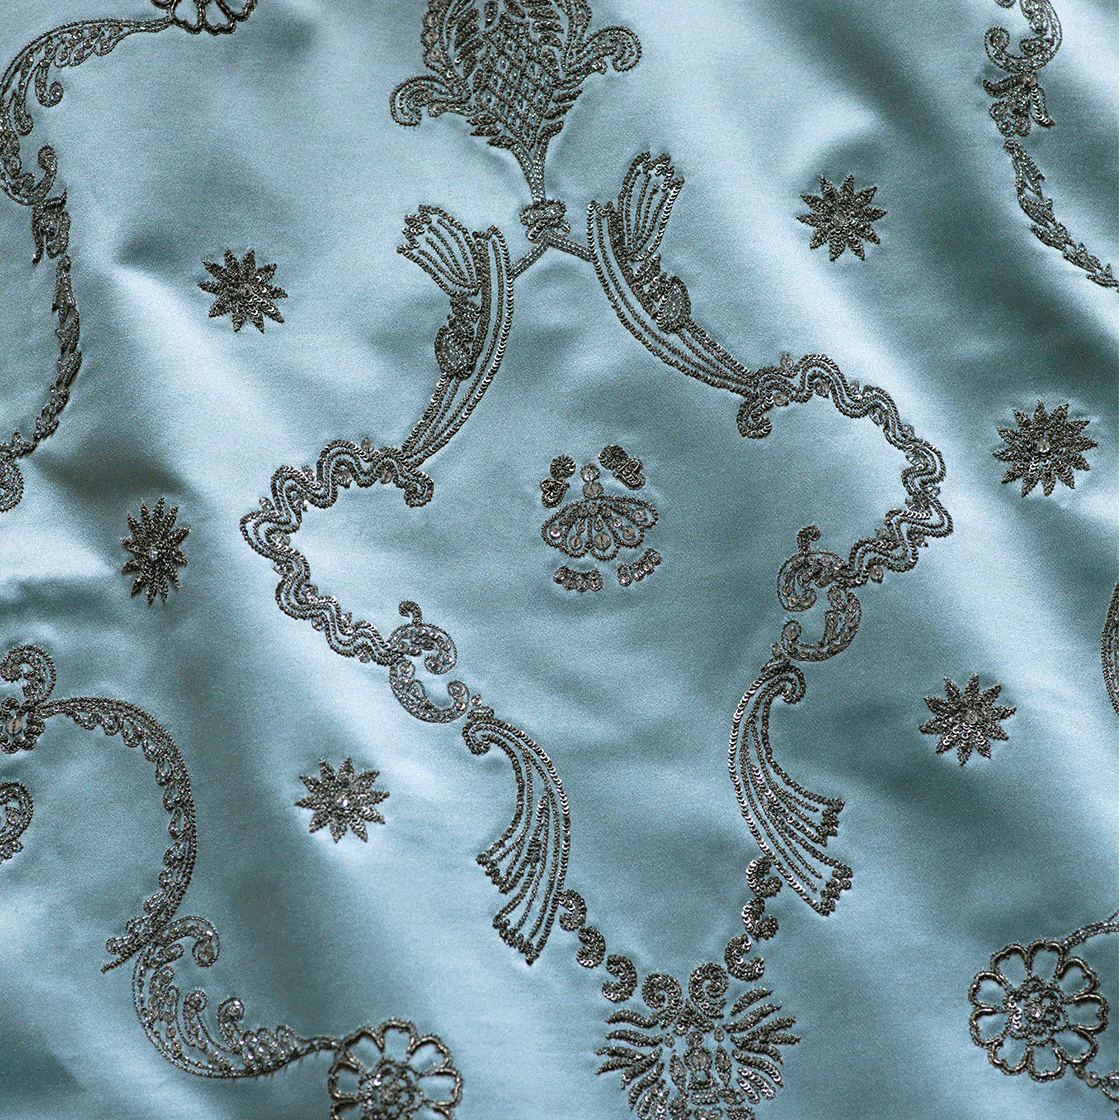 Tagore embroidery  in Silk satin - Blue